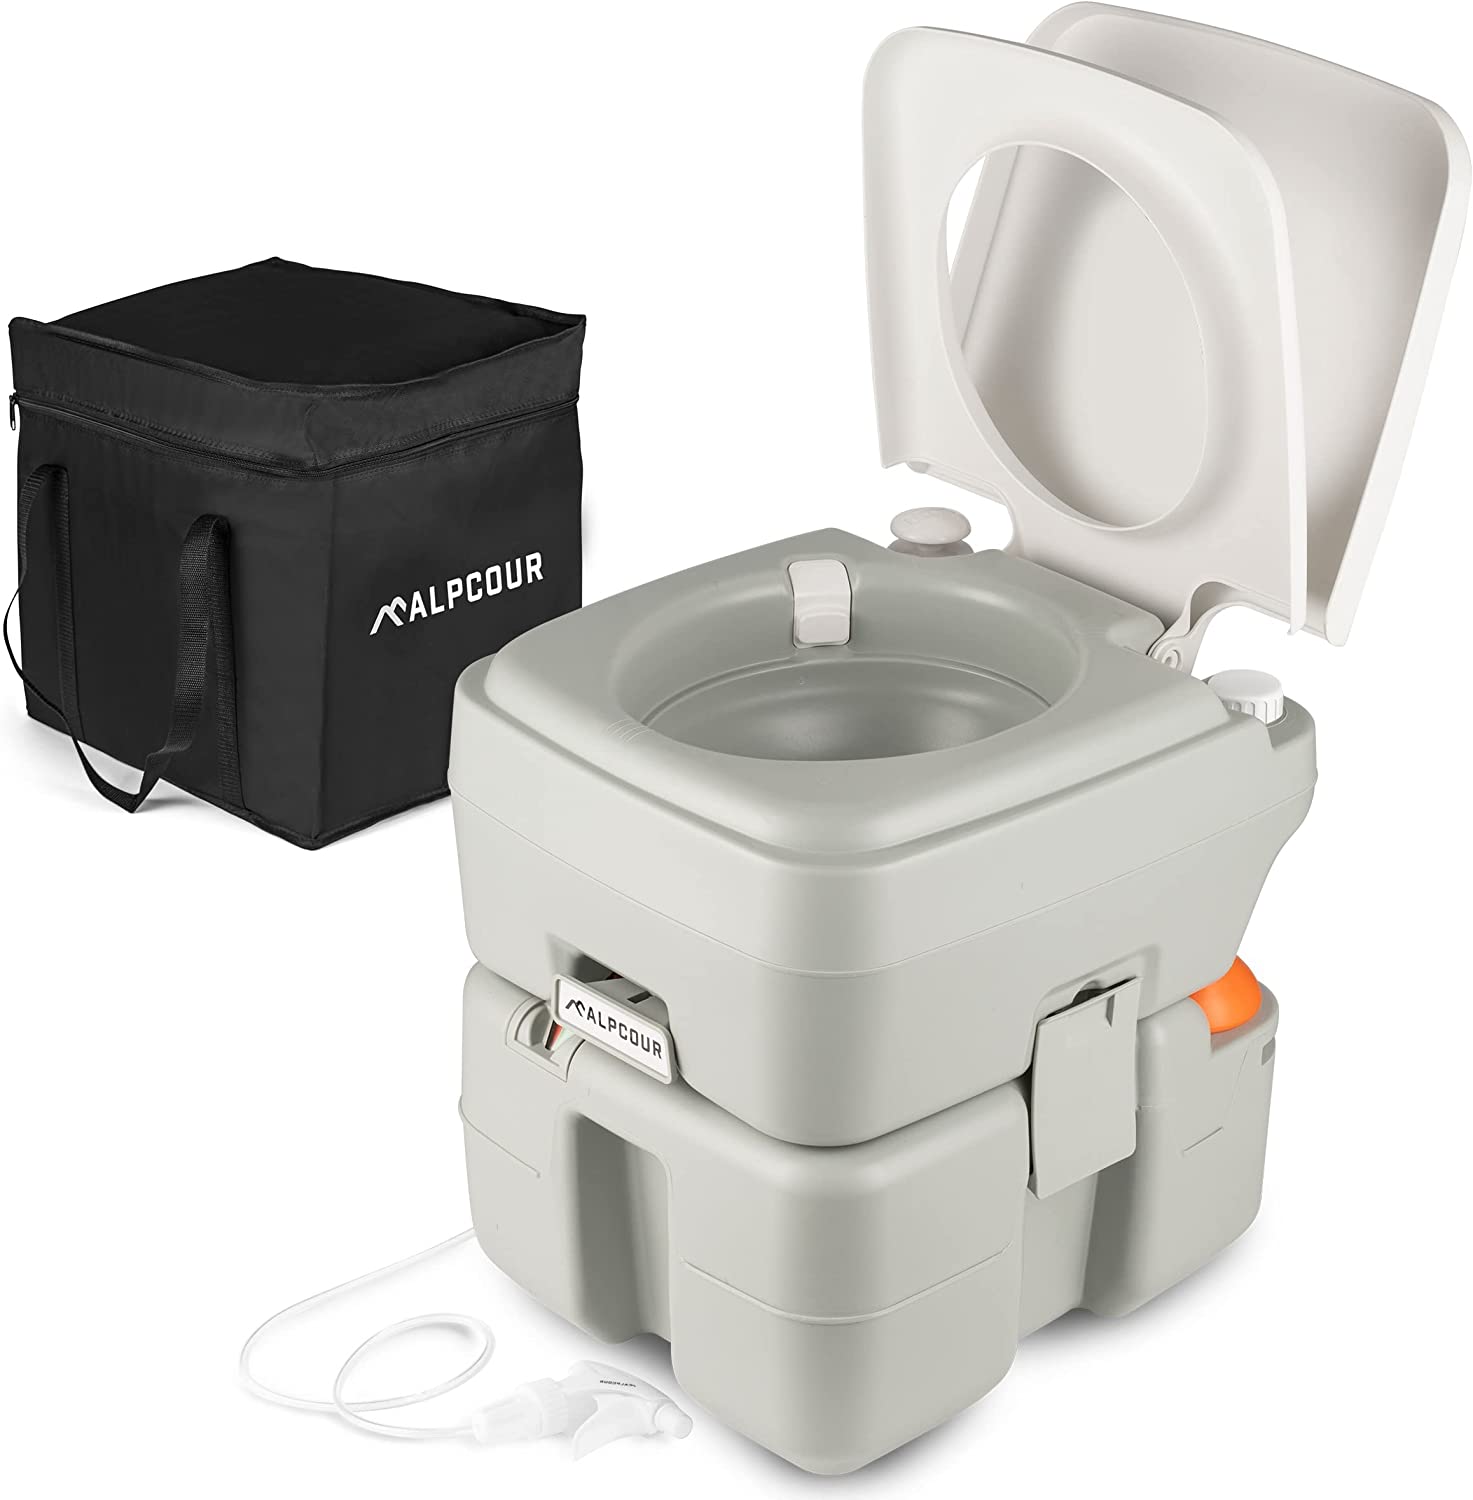 Alpcour Easy Clean Compact Portable Toilet